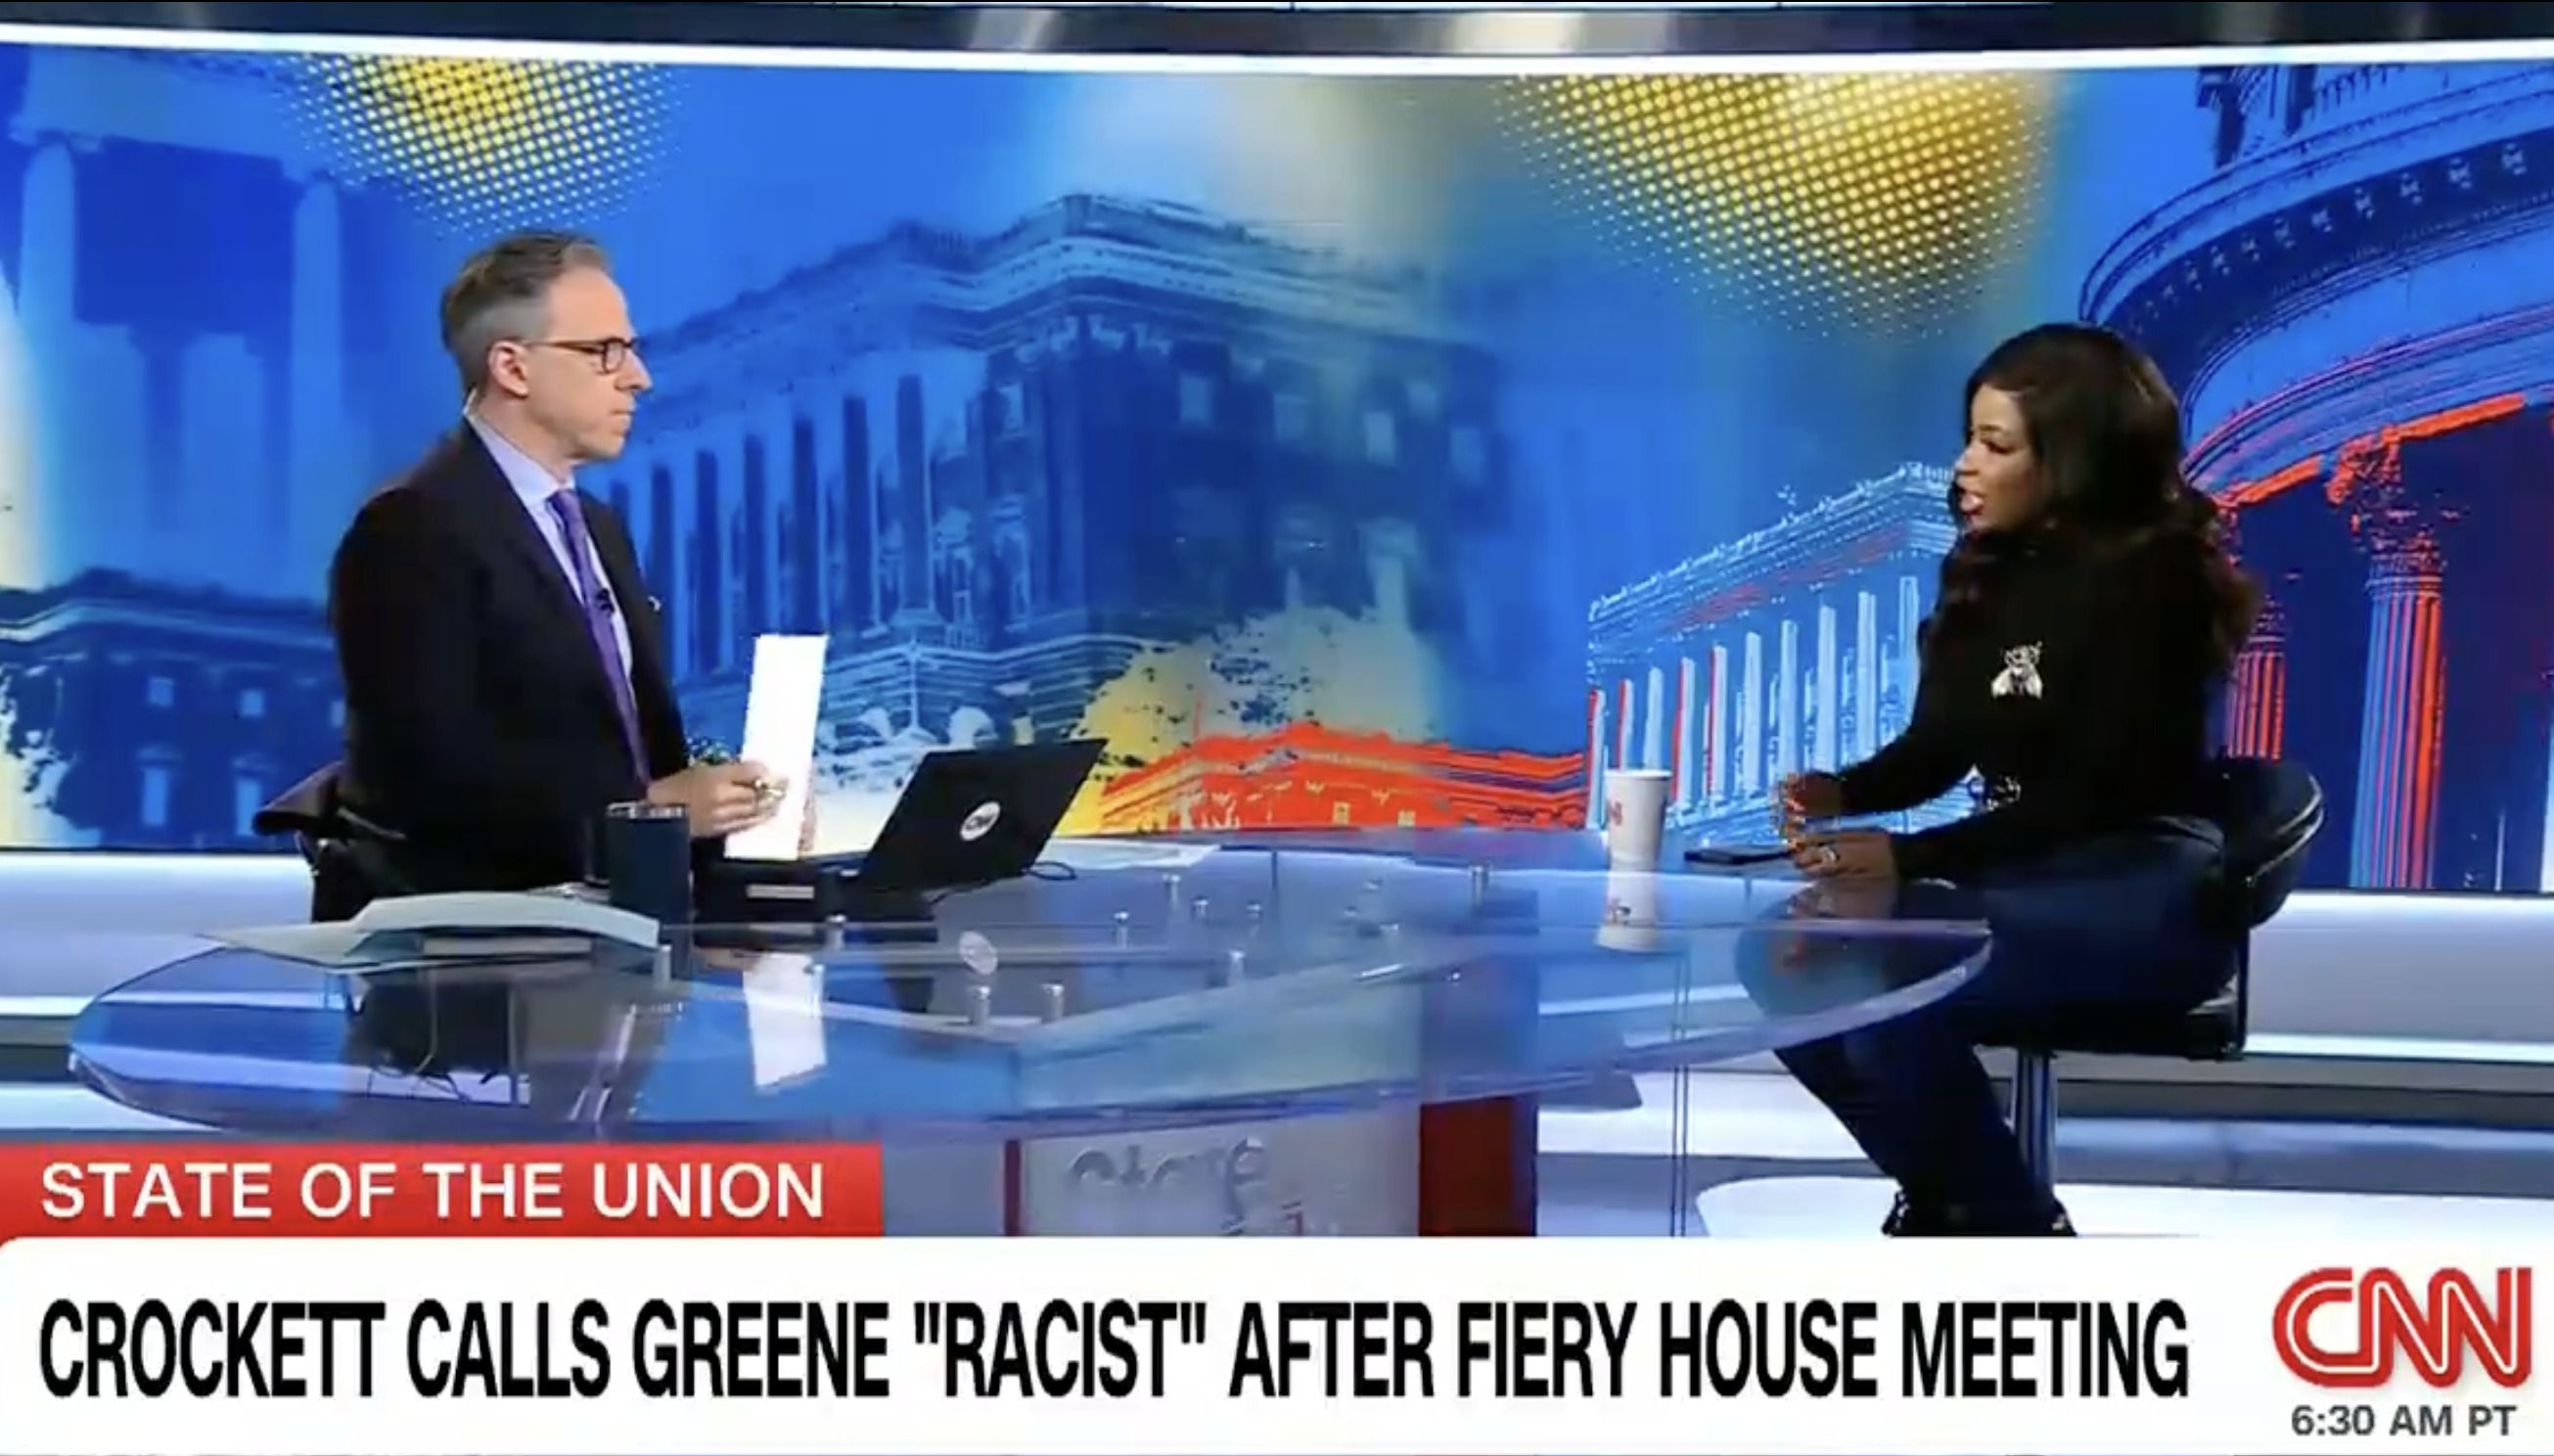 ‘You Attacked Her’: Even CNN Host Took Issue With Rep. Crockett’s Insulting Outburst Toward MTG